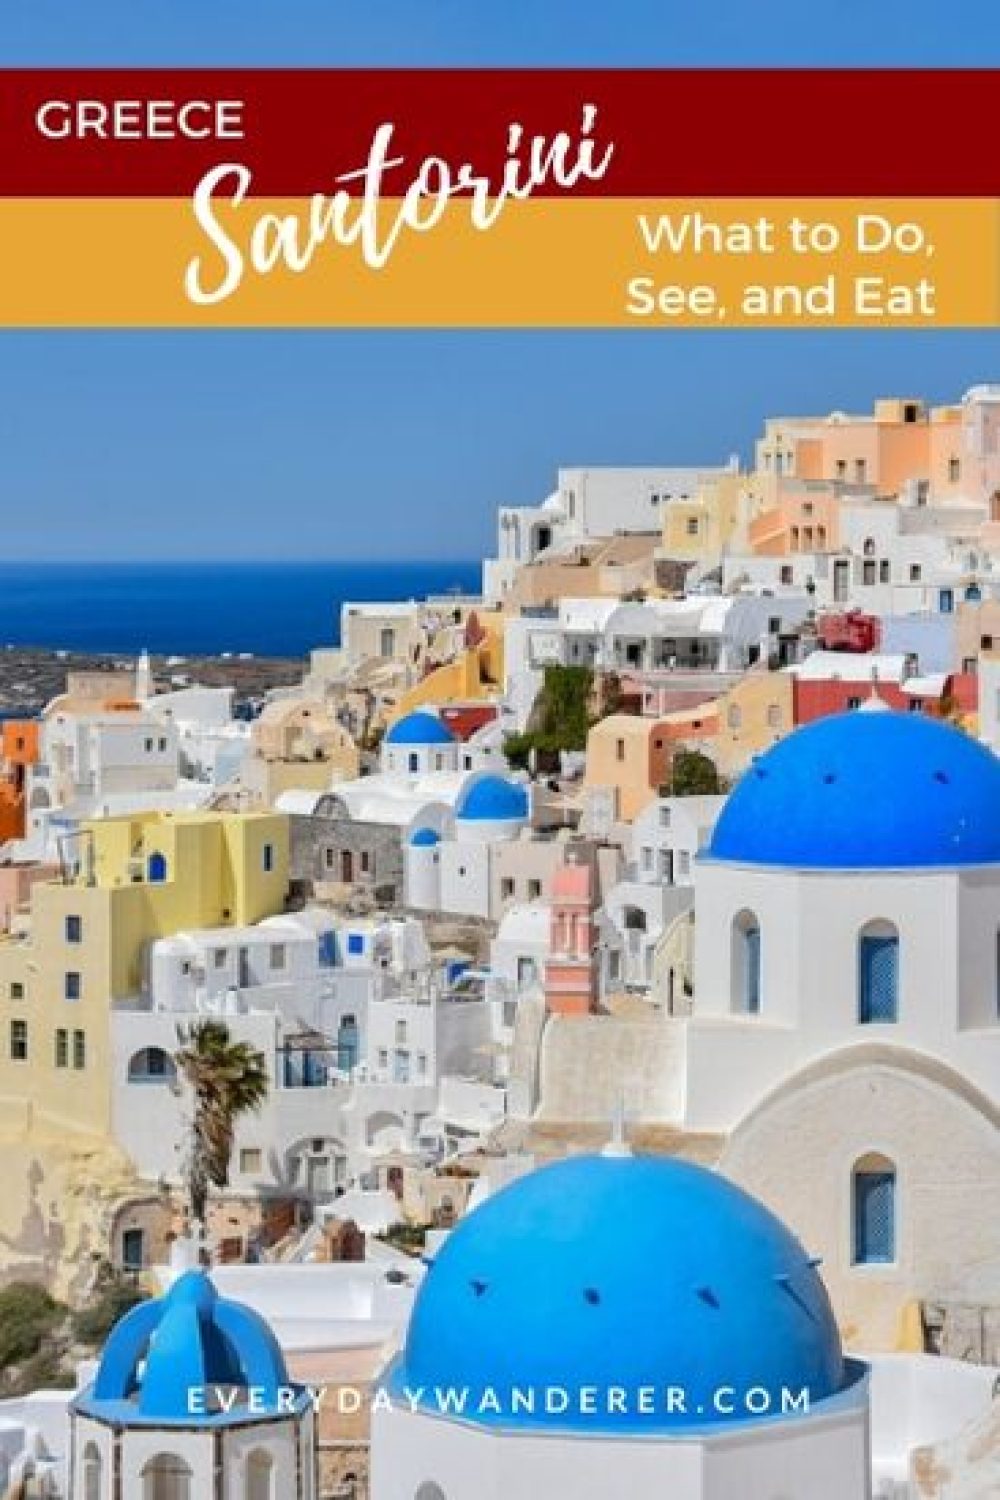 Things to do when you visit Santorini Greece. Santorini places to visit include the Anastasi Church. Best sunset spots in Santorini. Where to eat in Santorini. #santorini #greece #europe #travel